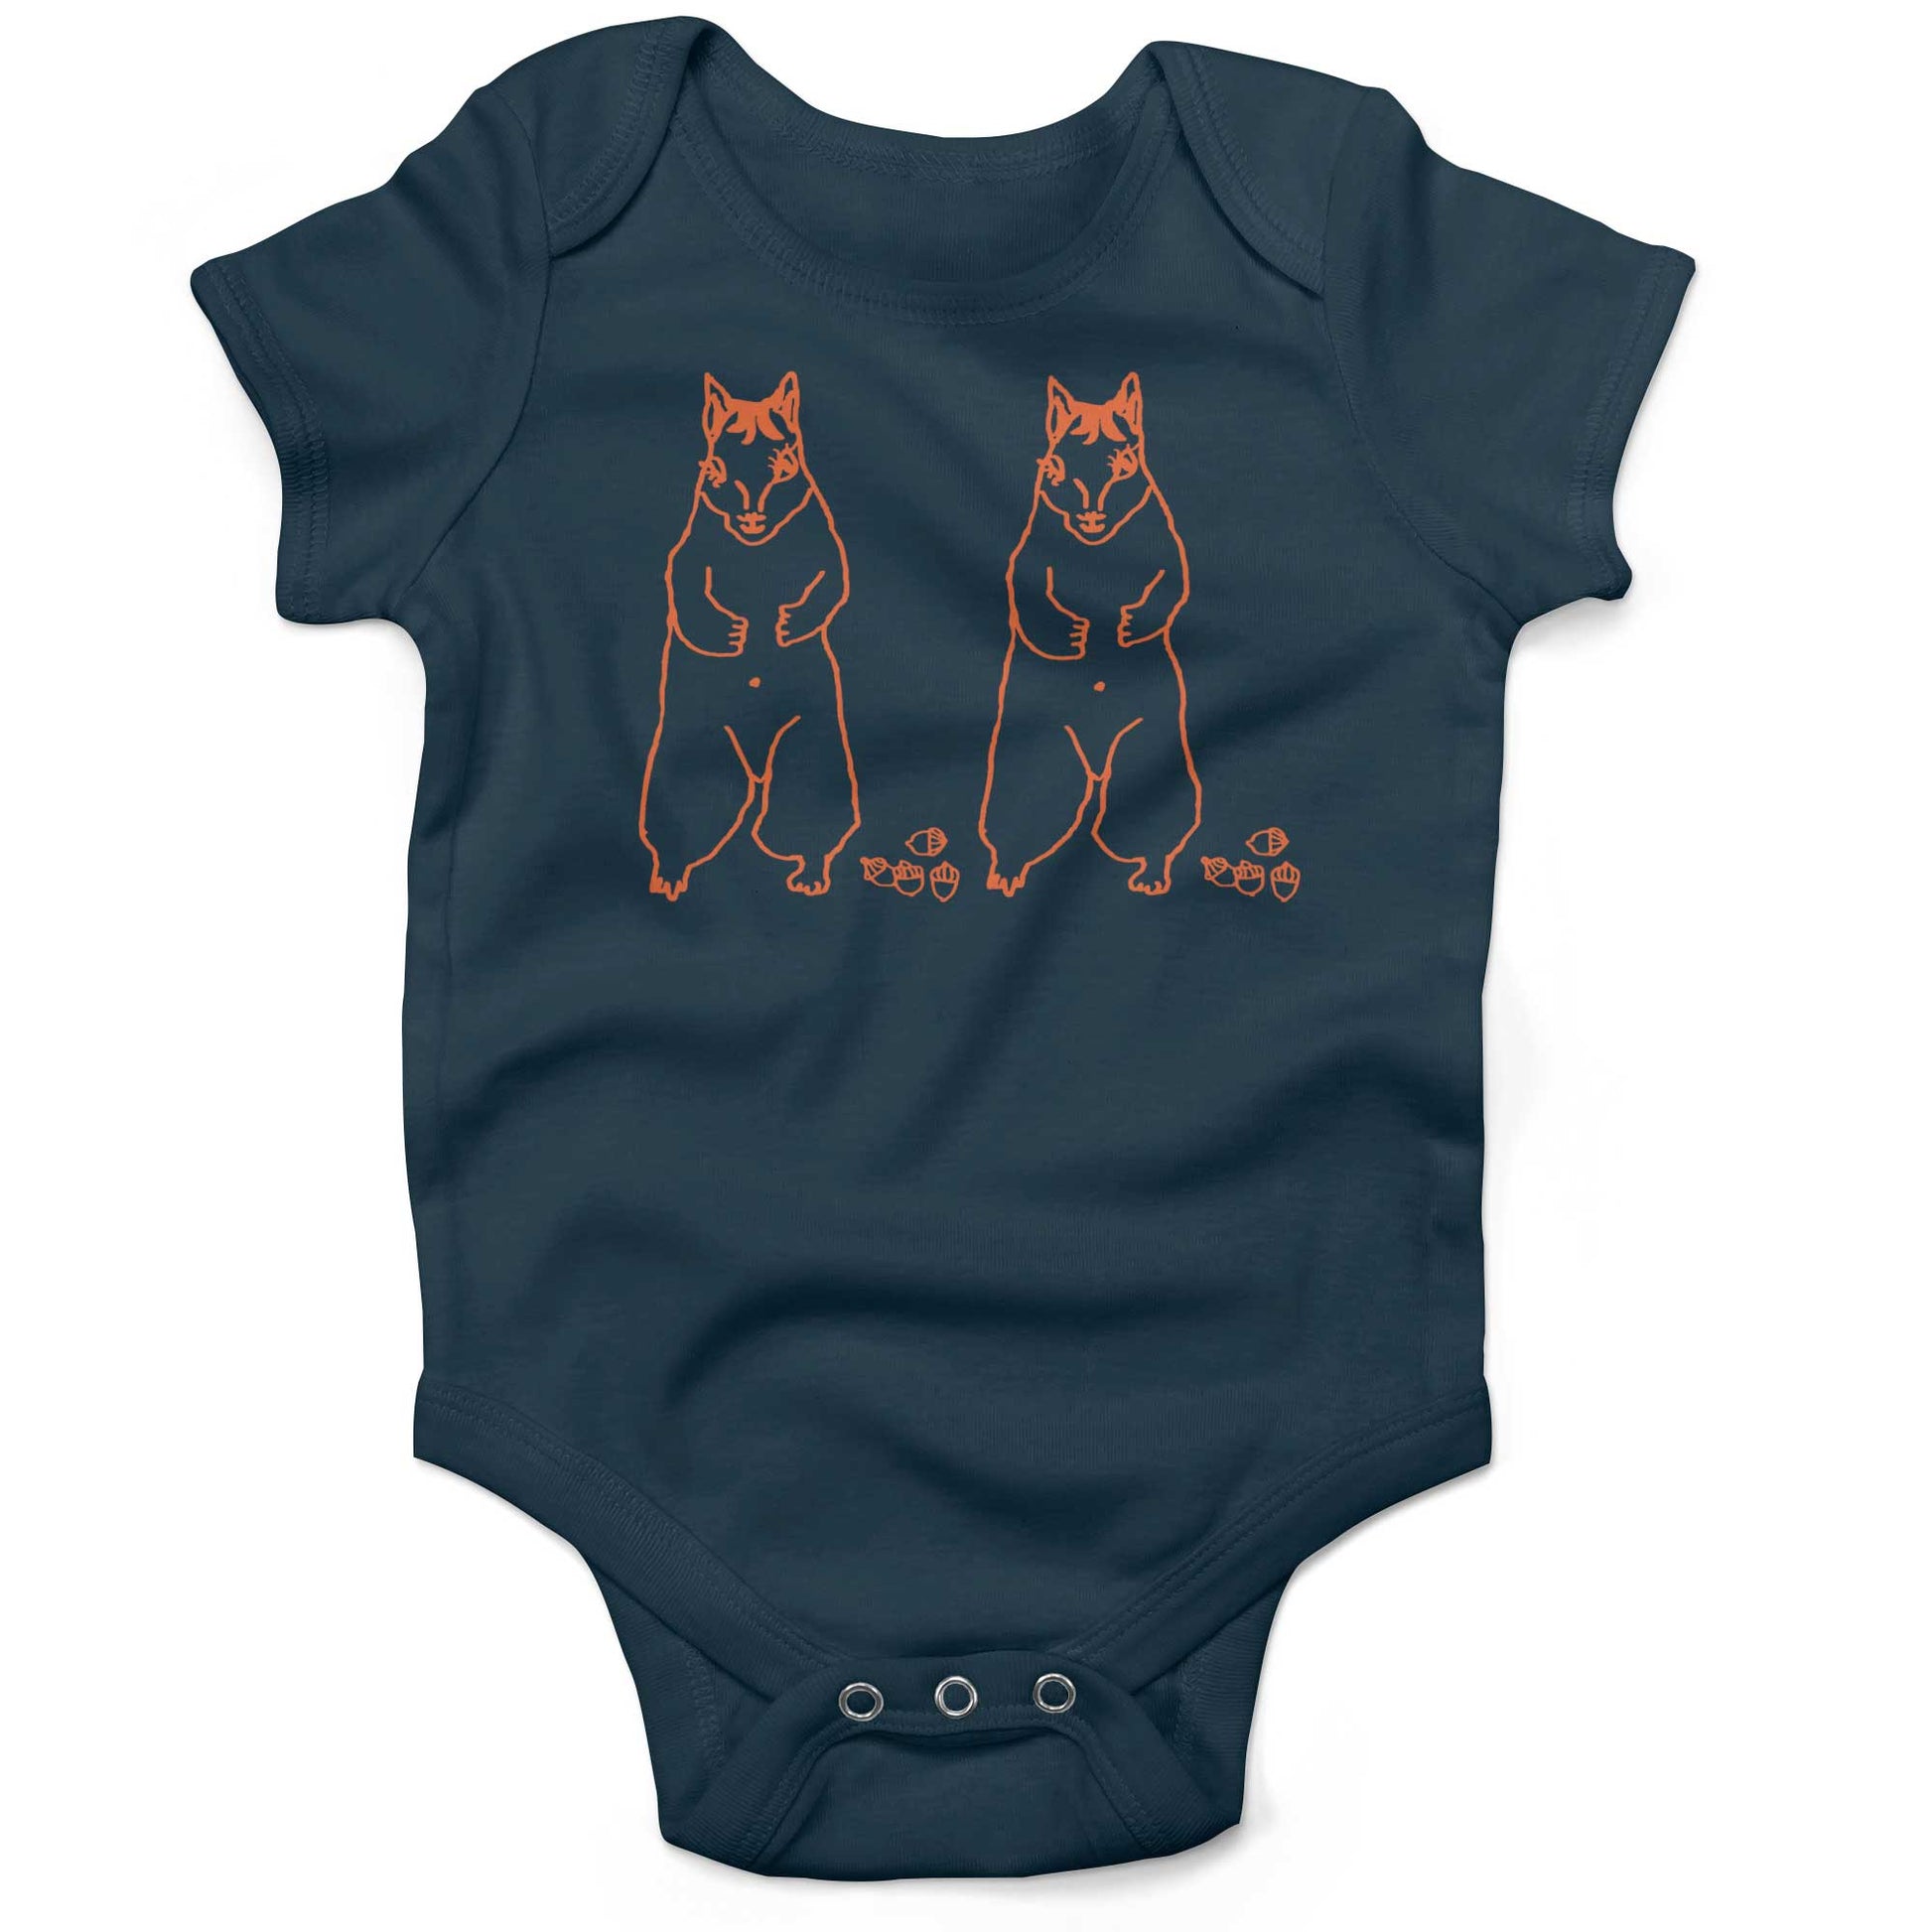 Cute Dancing Squirrels With Nuts Infant Bodysuit or Raglan Tee-Organic Pacific Blue-3-6 months